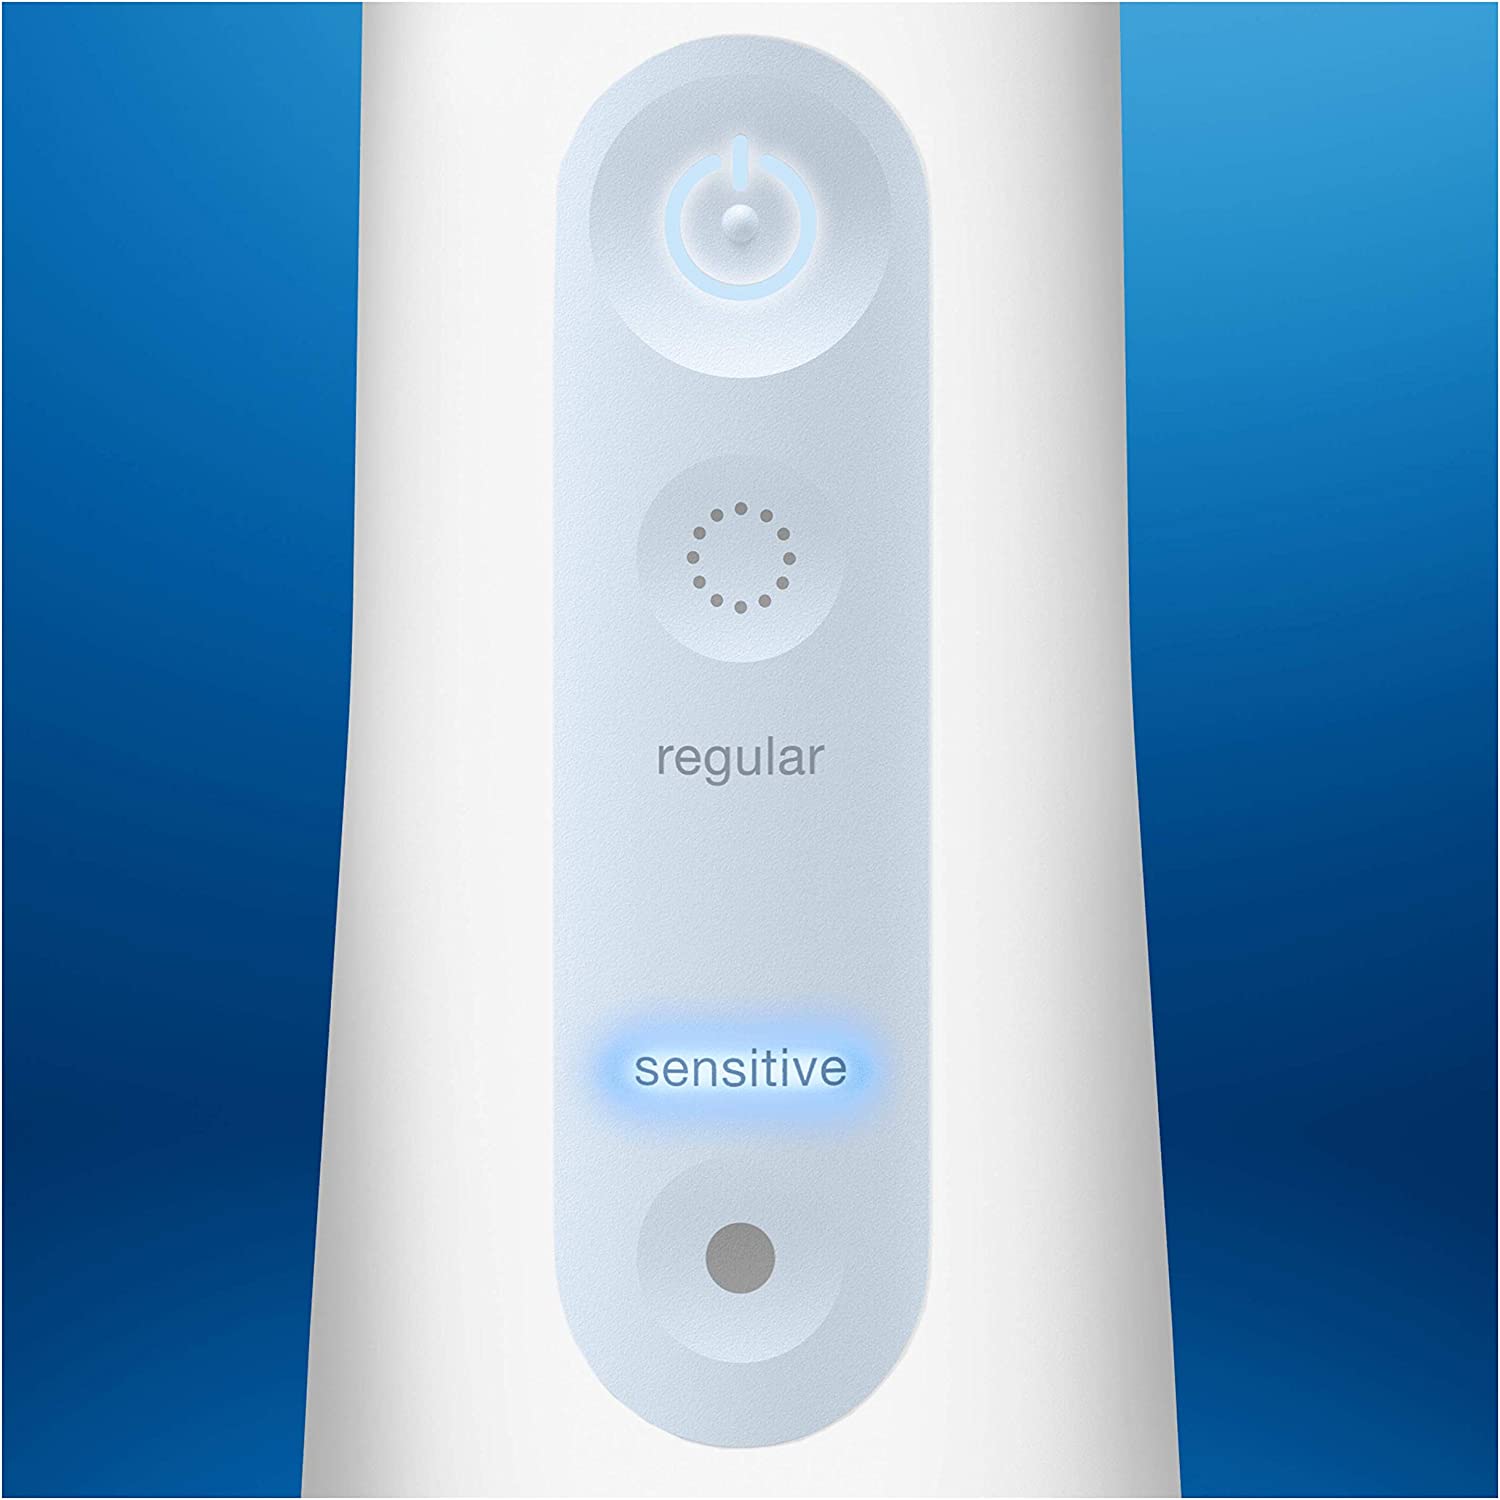 Oral-B Aquacare 4 Water Flosser Cordless Irrigator, Featuring Oxyjet Technology and 4 Cleaning Modes, UK 2 Pin Plug - Healthxpress.ie